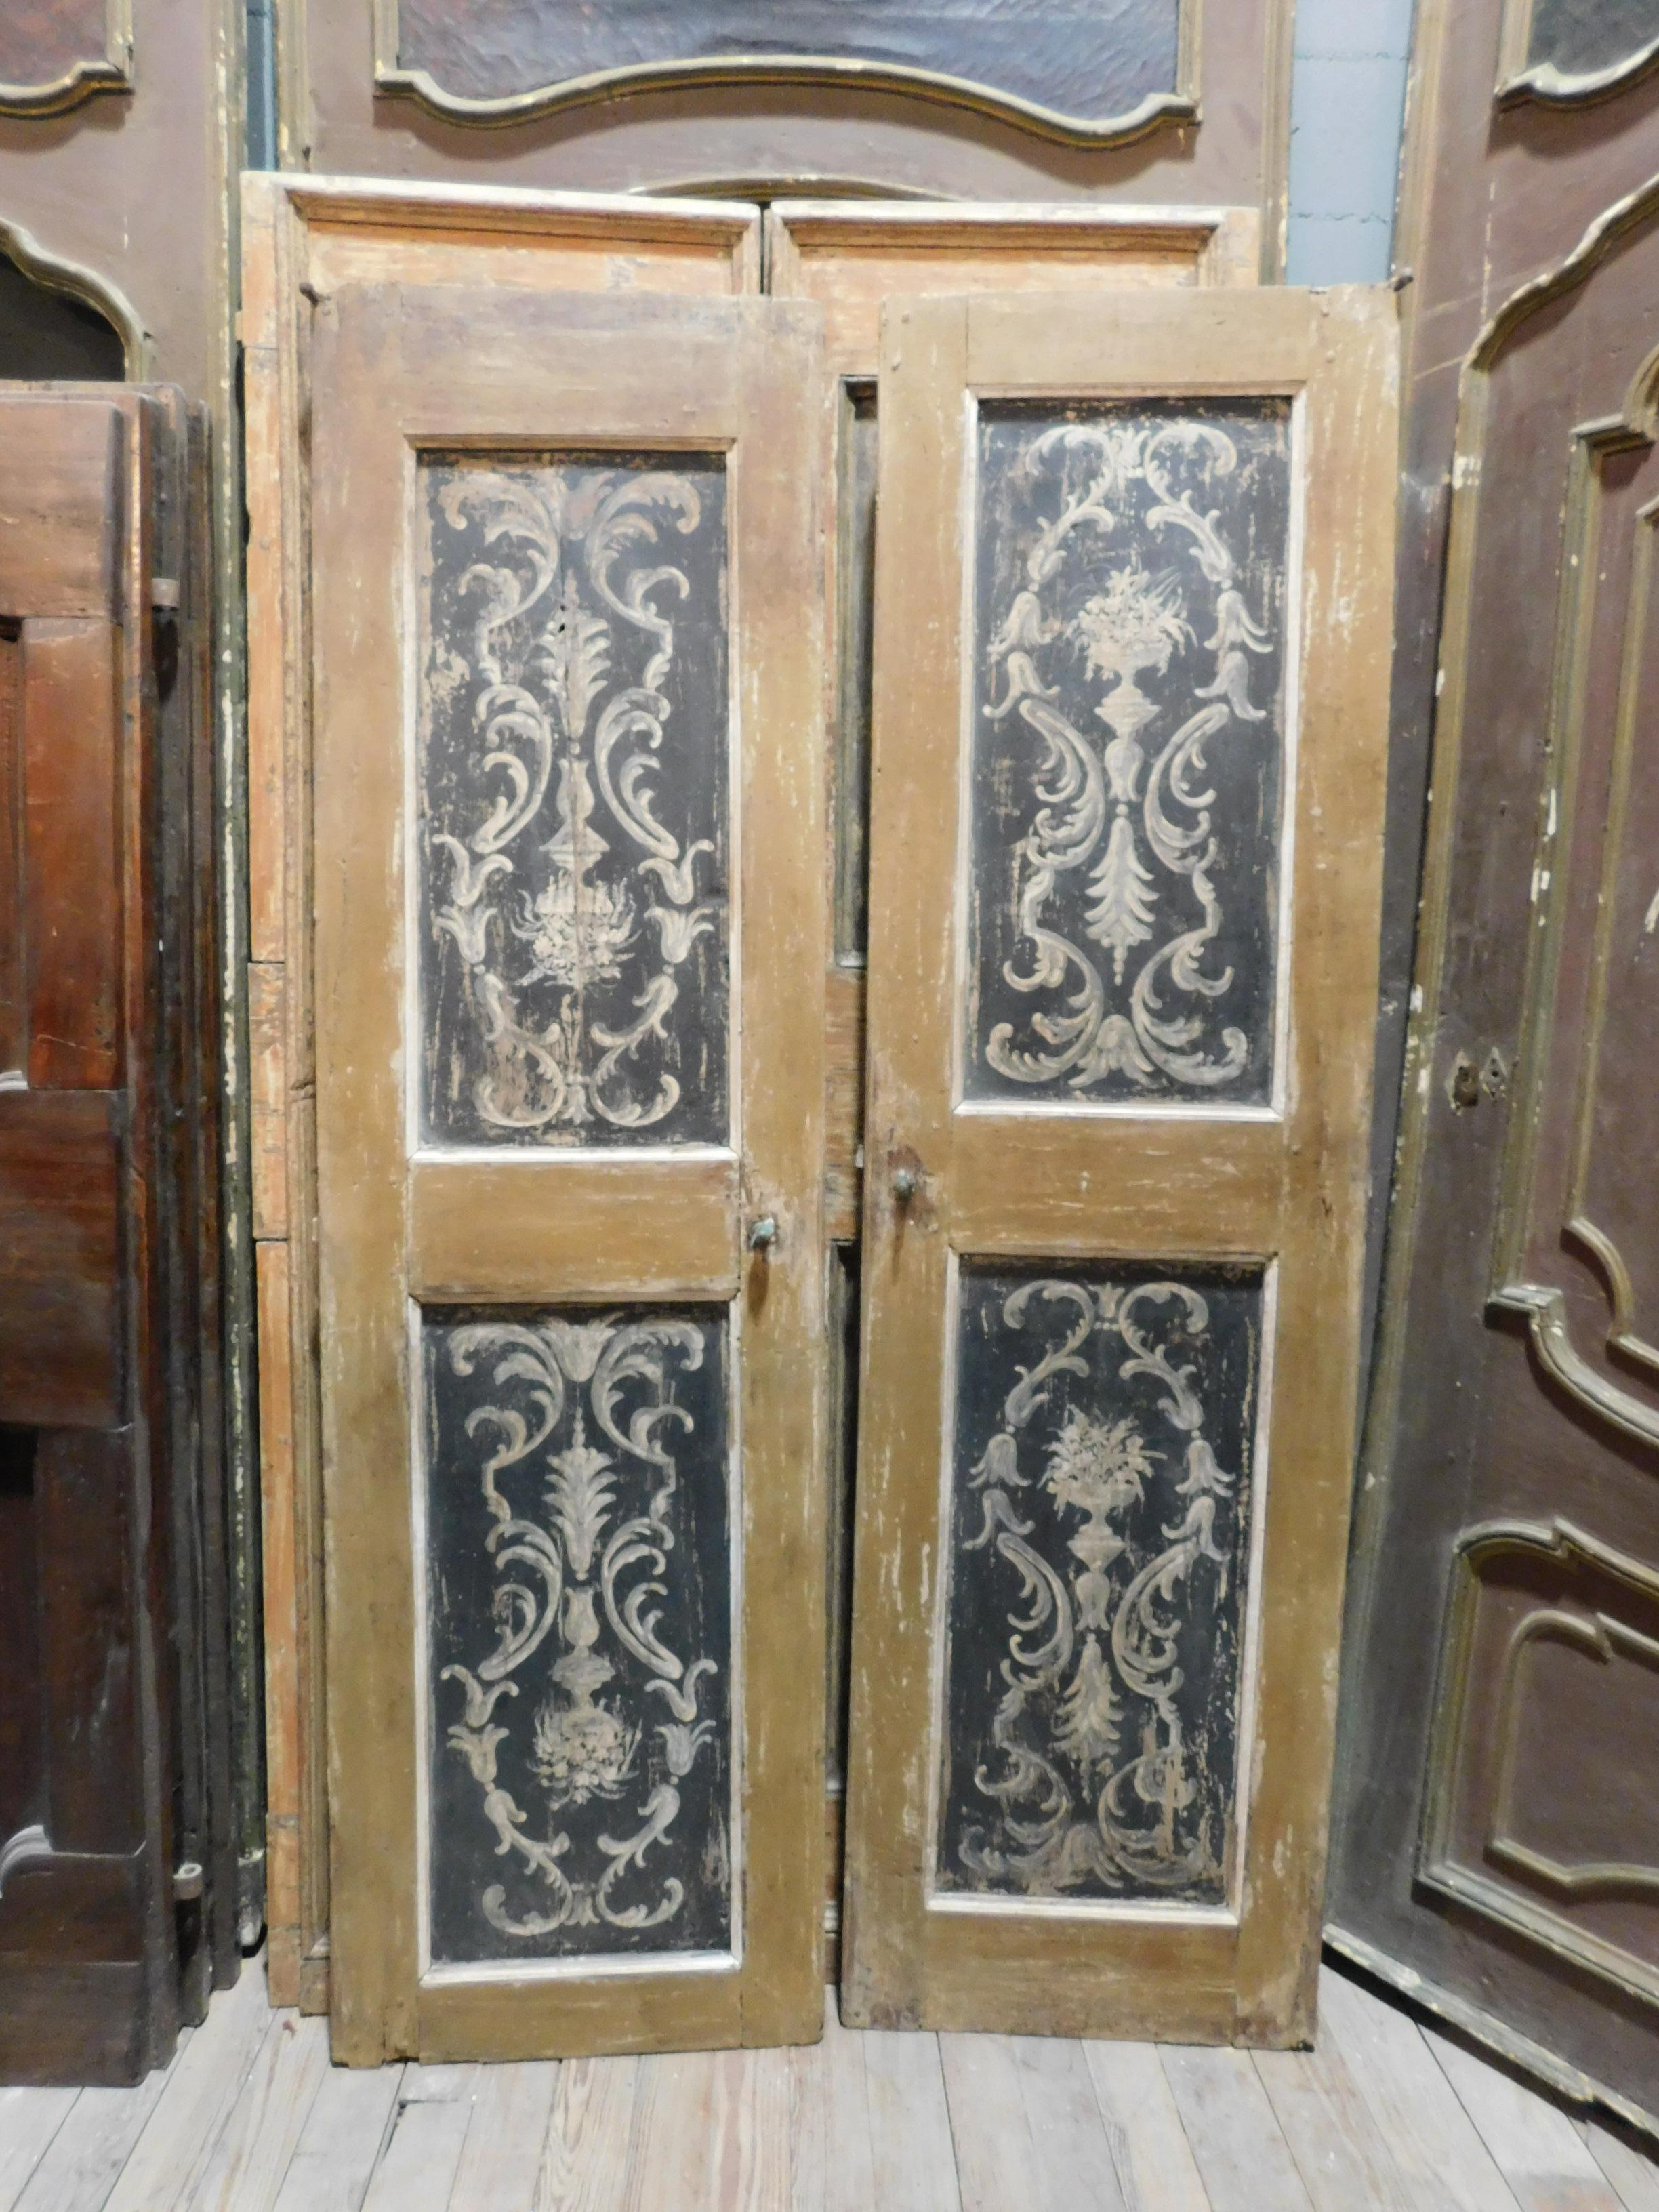 N.1 antique double-leaf interior doors, without frame but painted on an orange and black background, both front and back the same, very precious with a rich and well executed Baroque style painting, built and painted by master craftsmen in the 18th